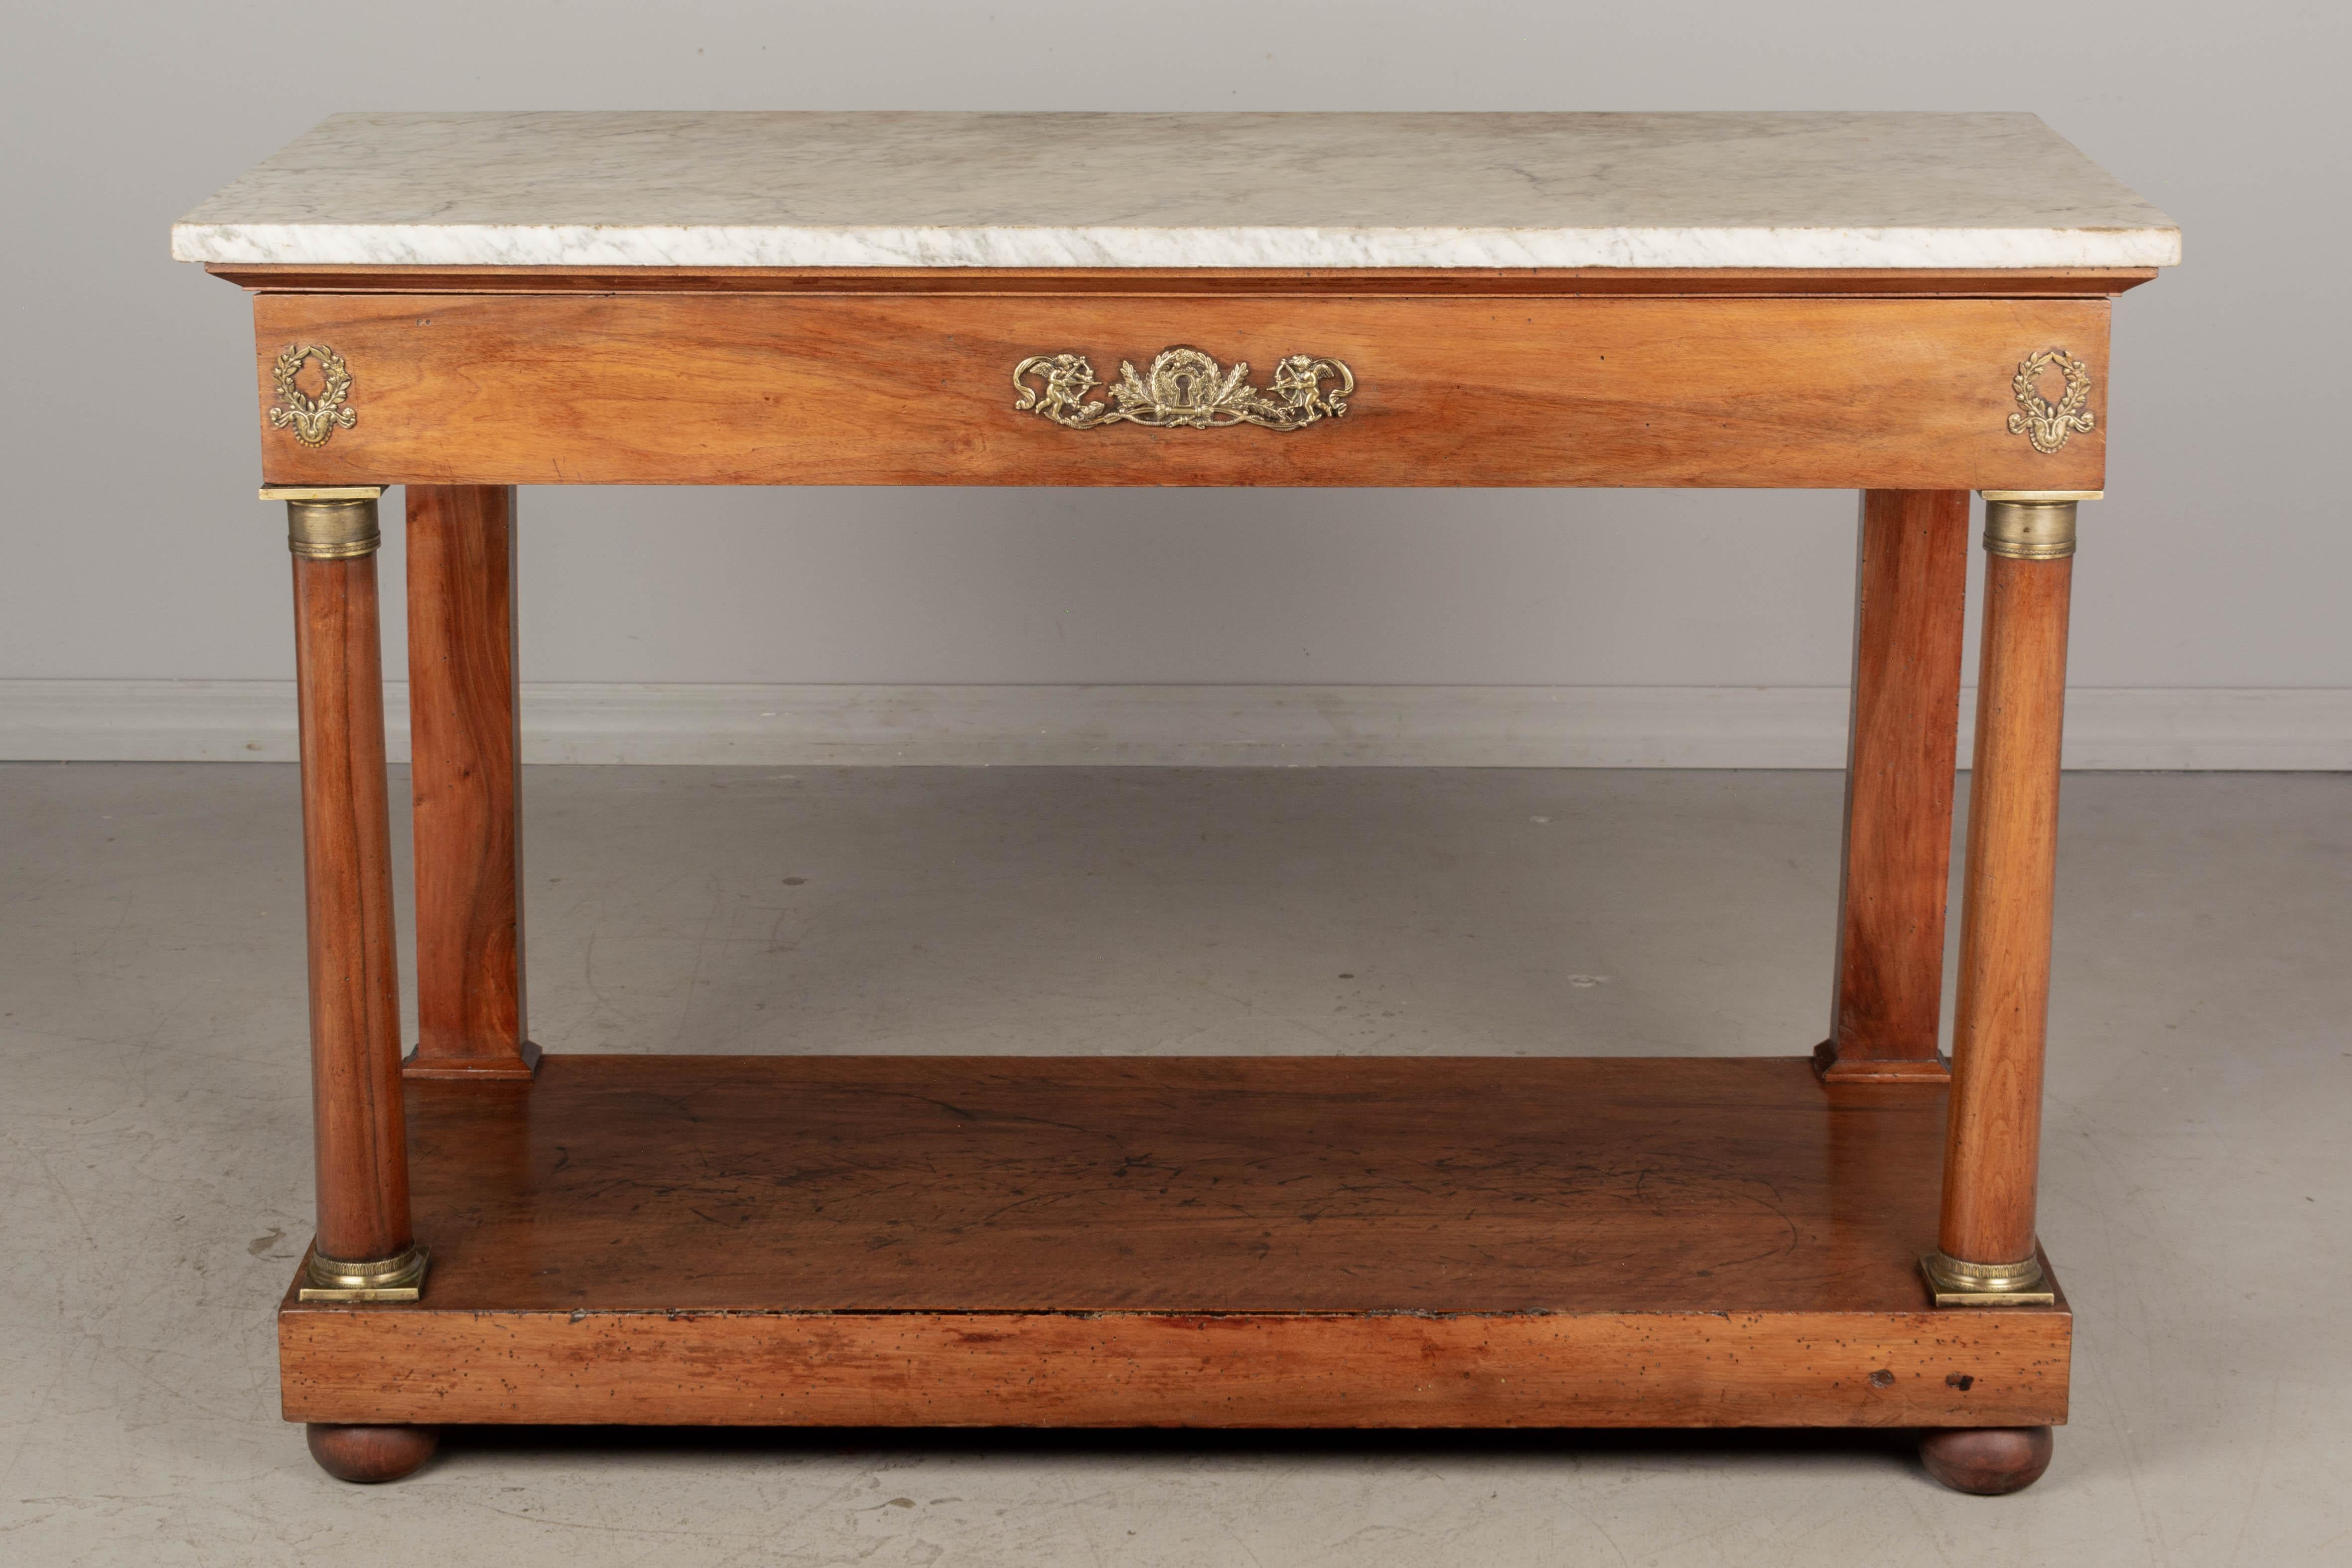 19th Century French Empire Marble-Top Console In Good Condition For Sale In Winter Park, FL